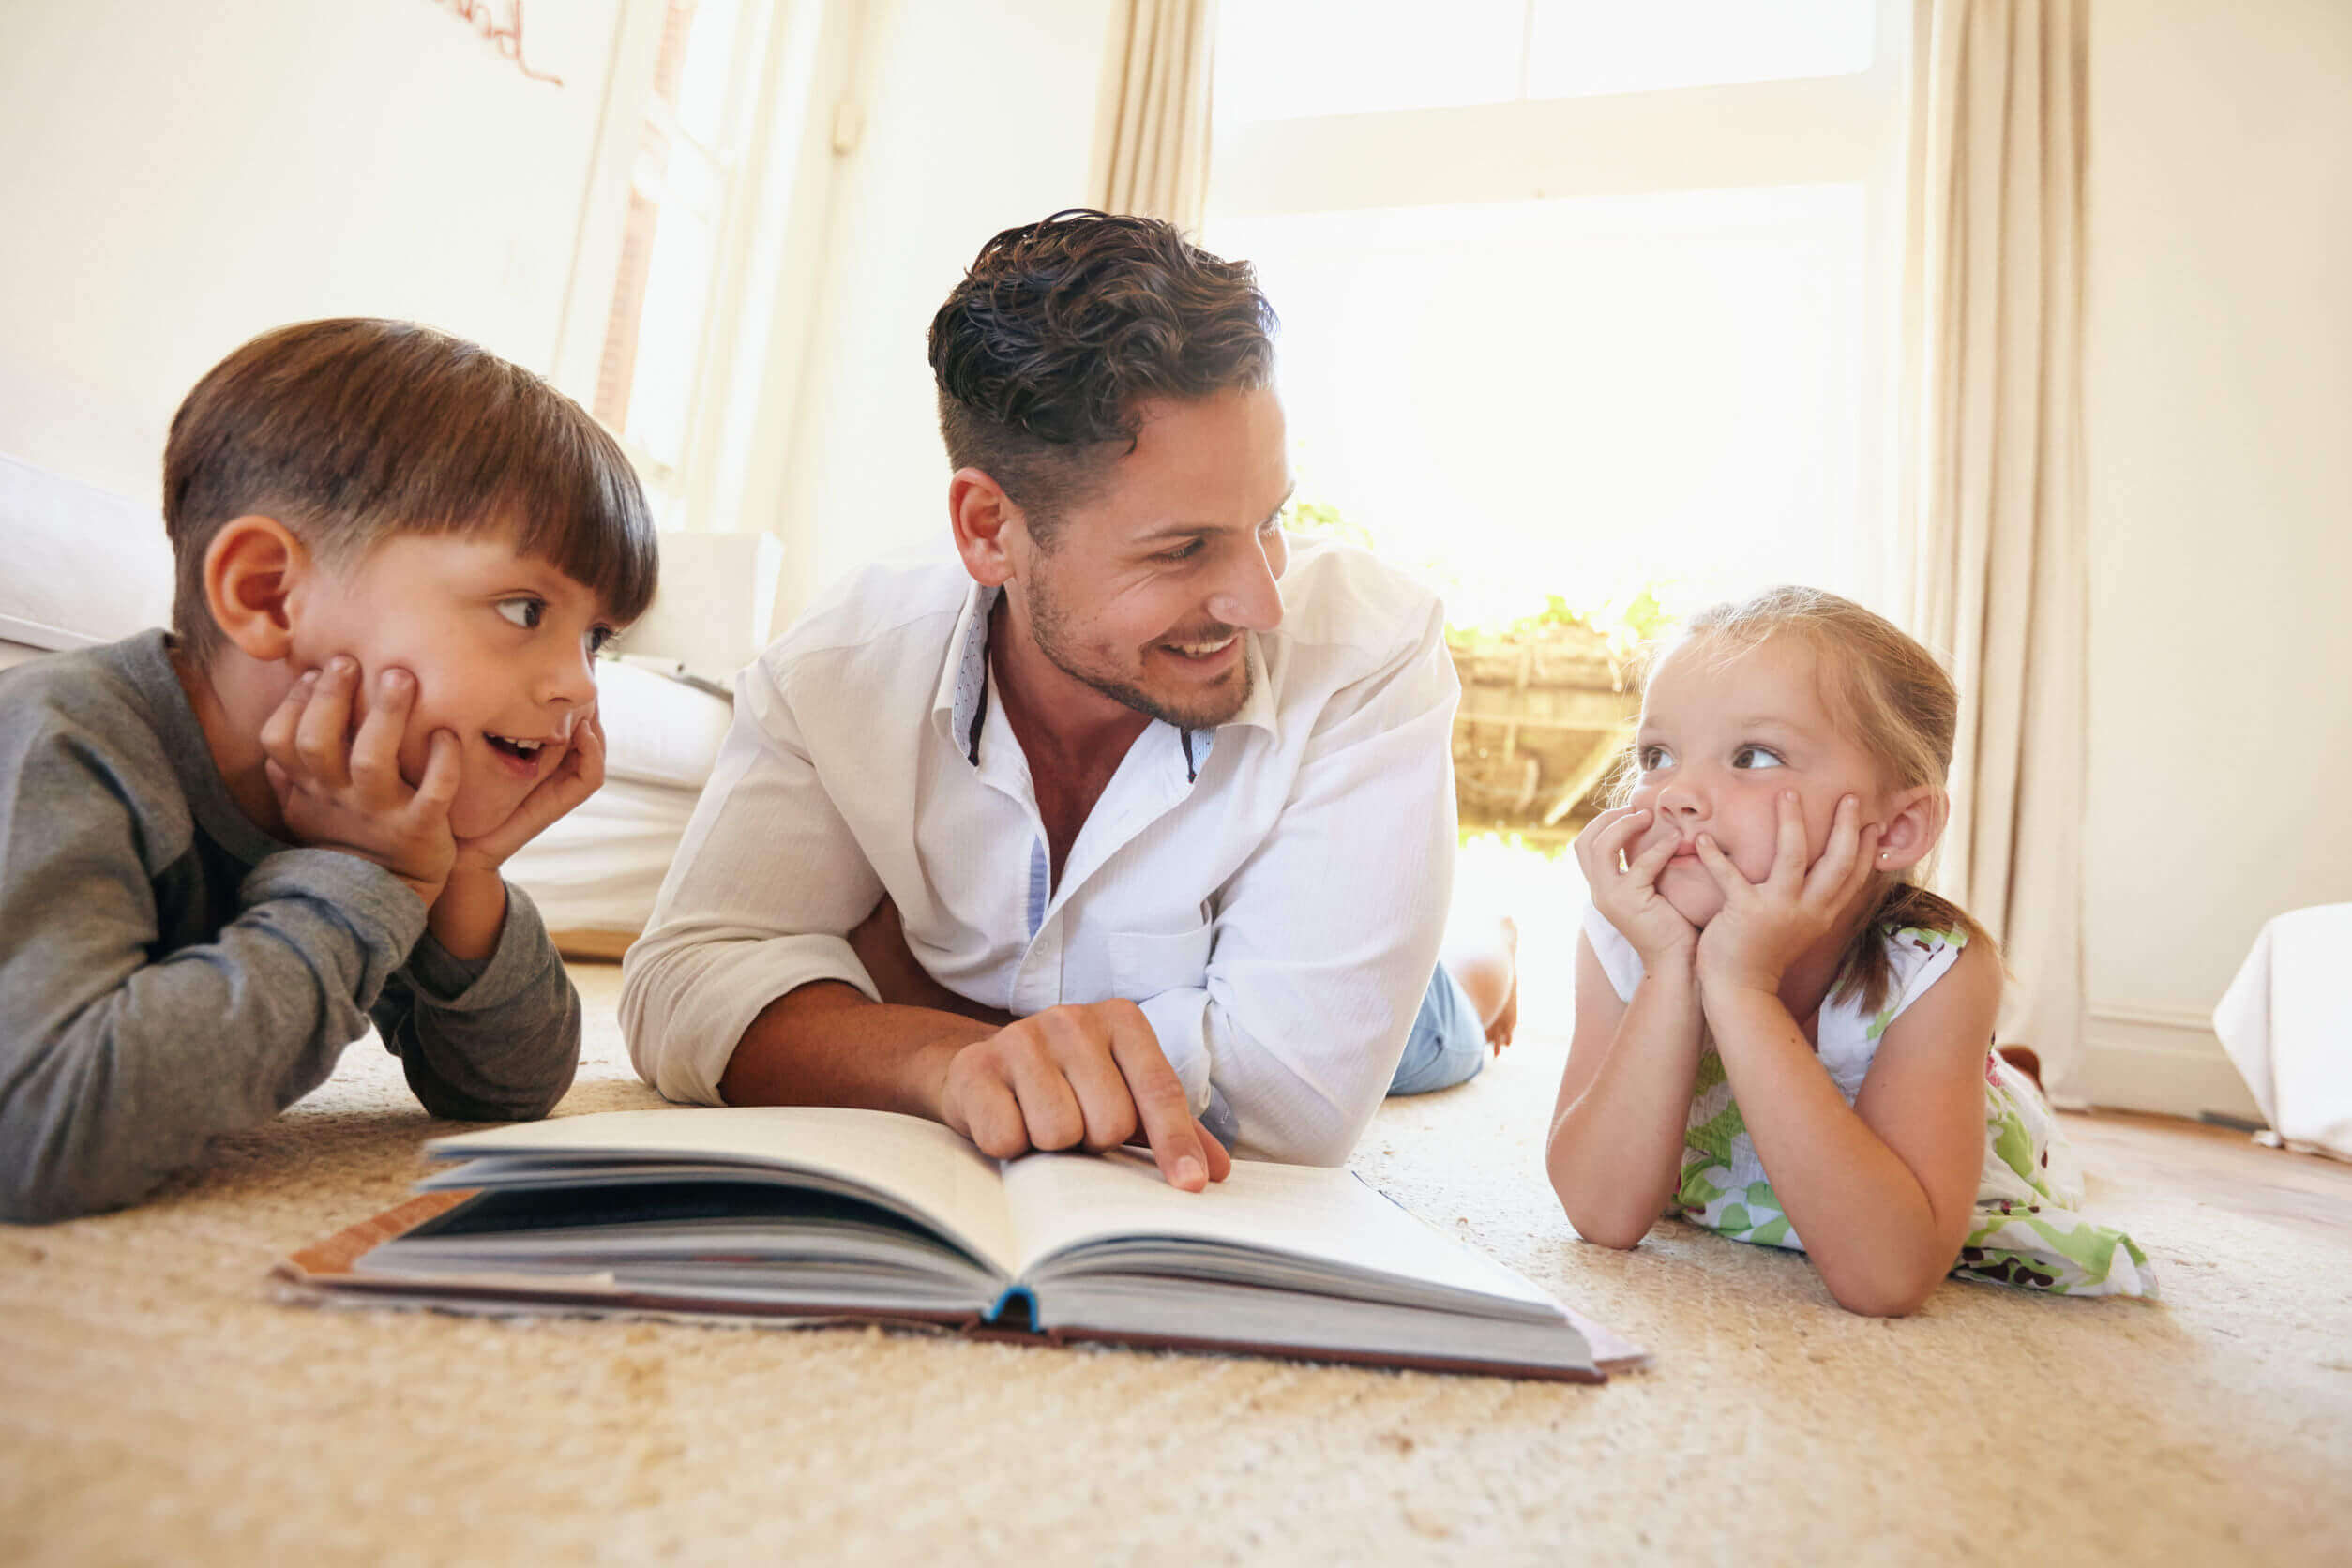 A dad reading on the floor with his son and daughter.